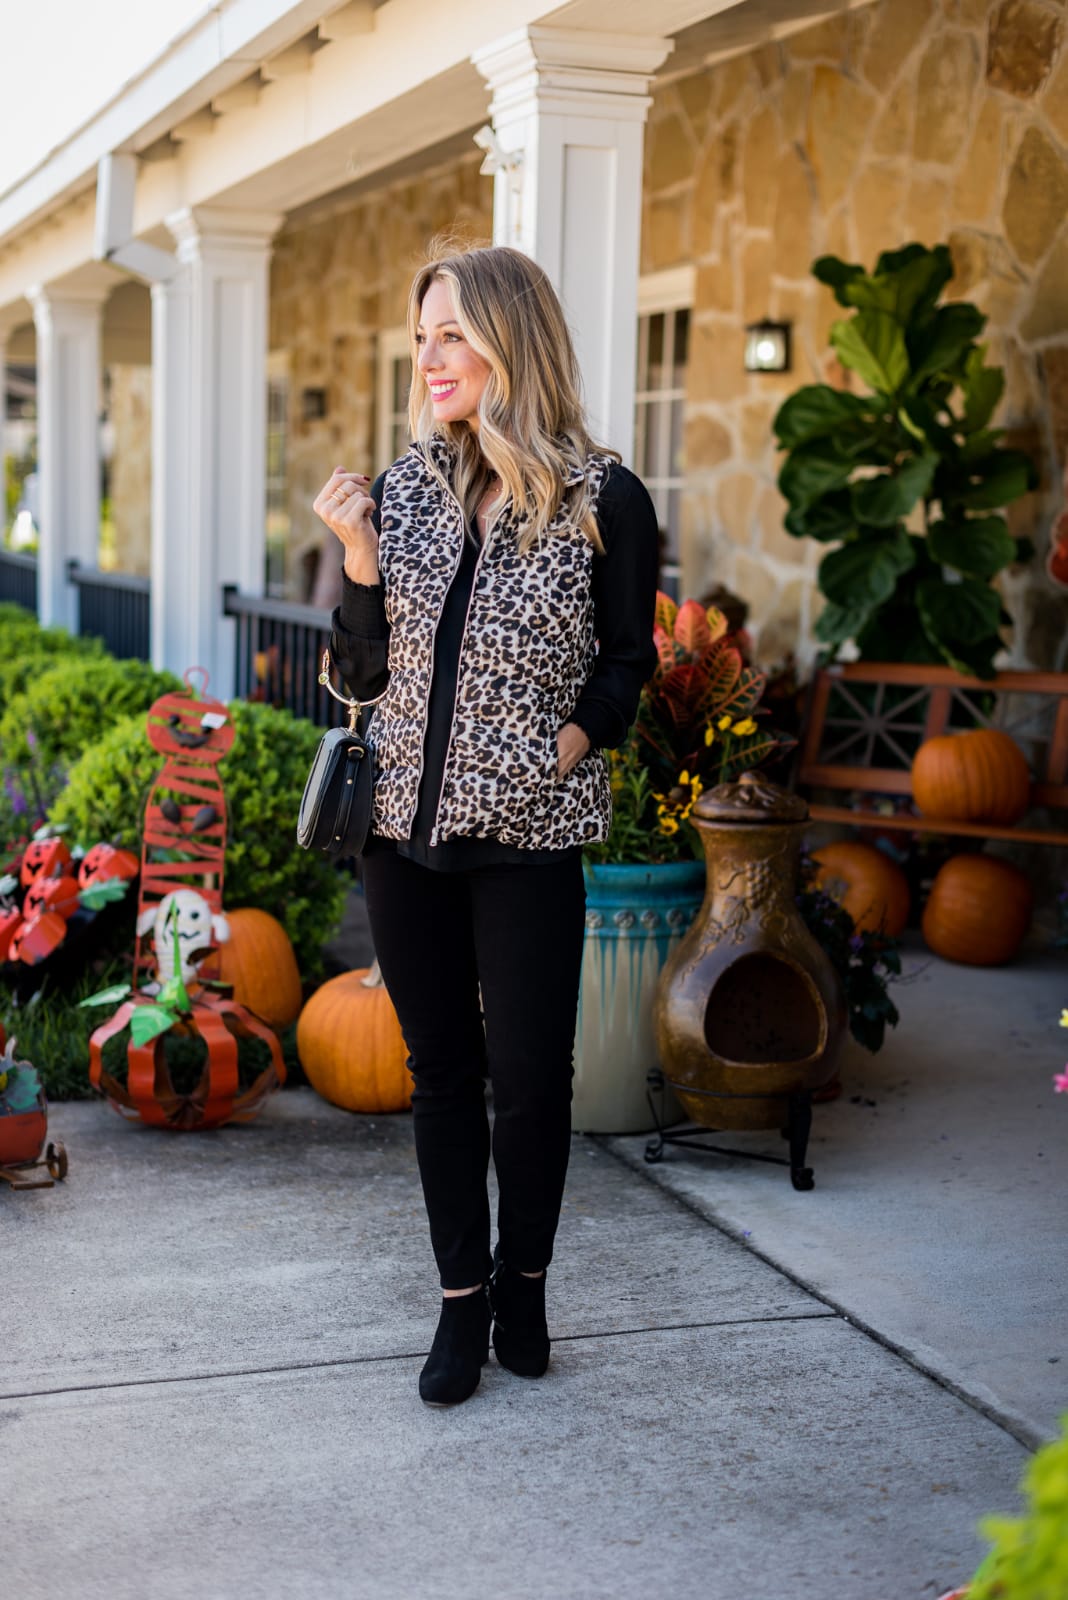 Cute fall outfit with leopard vest.6